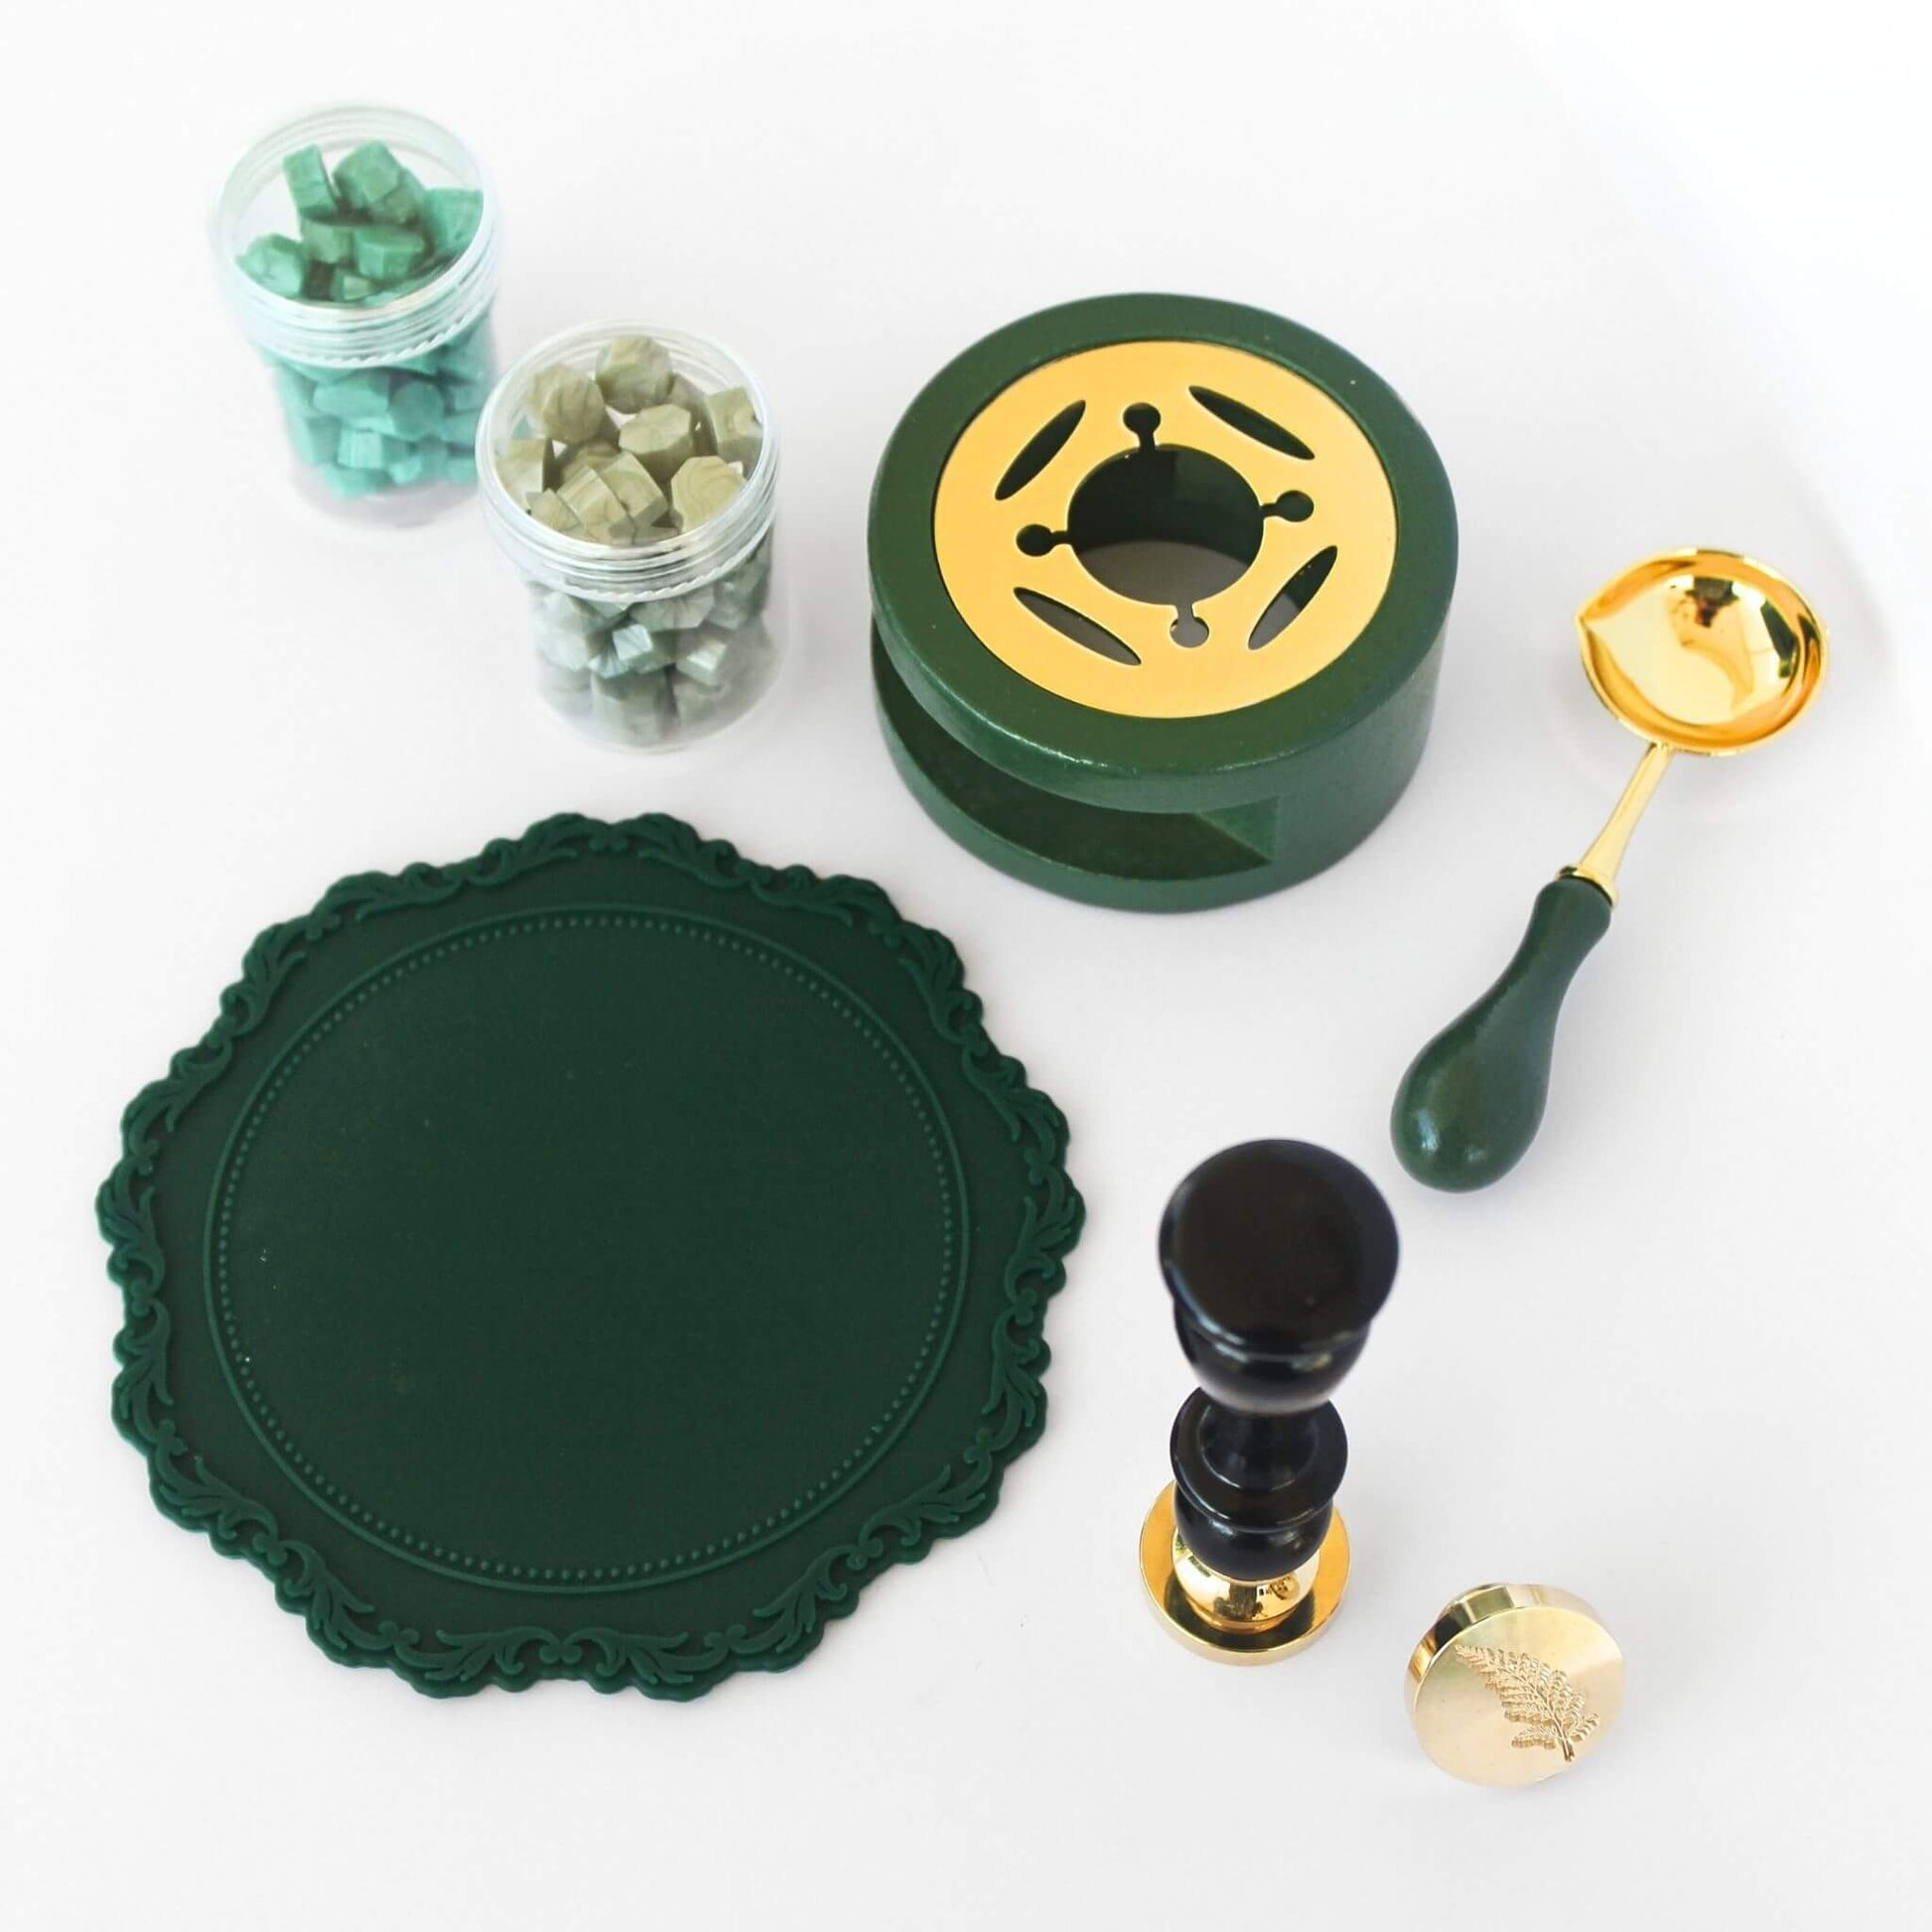 Green lovers wax seal kit with green sealing wax, green wax melting tools, green wax sealing mat and fern and leaf wax seals